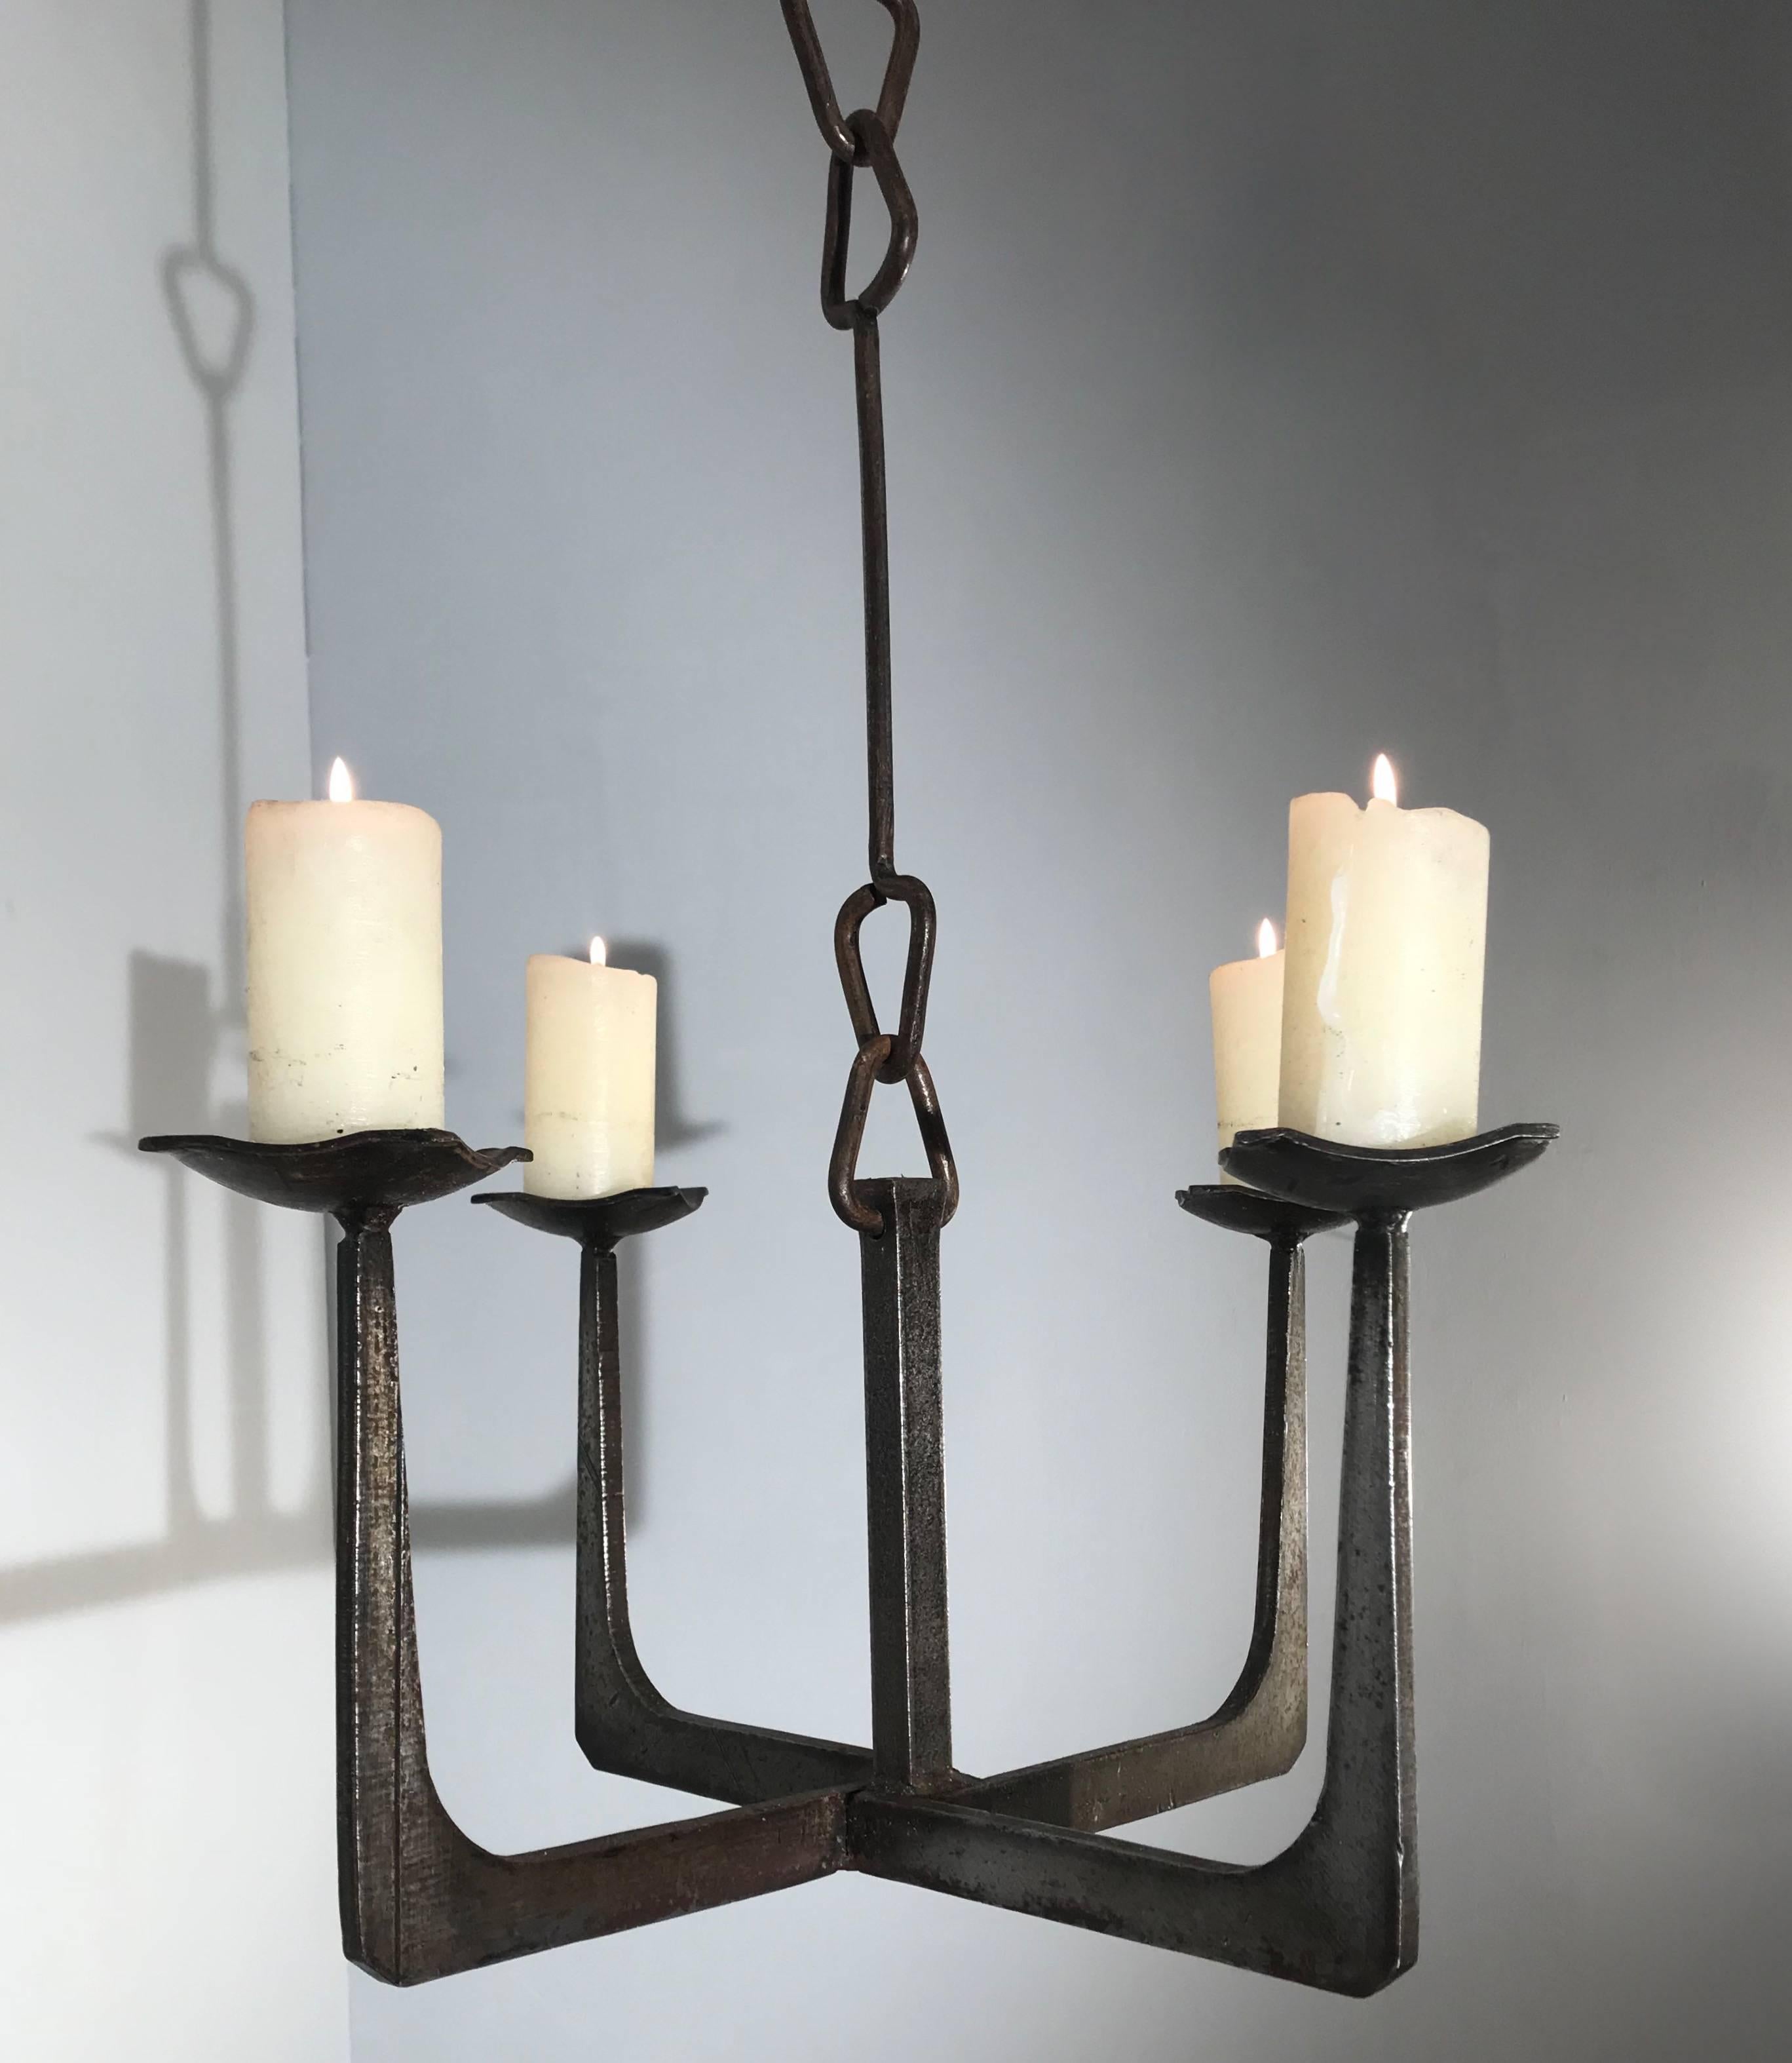 Hand-Crafted Early 20th Century Arts & Crafts Wrought Iron Candle Lamp Four Candle Chandelier